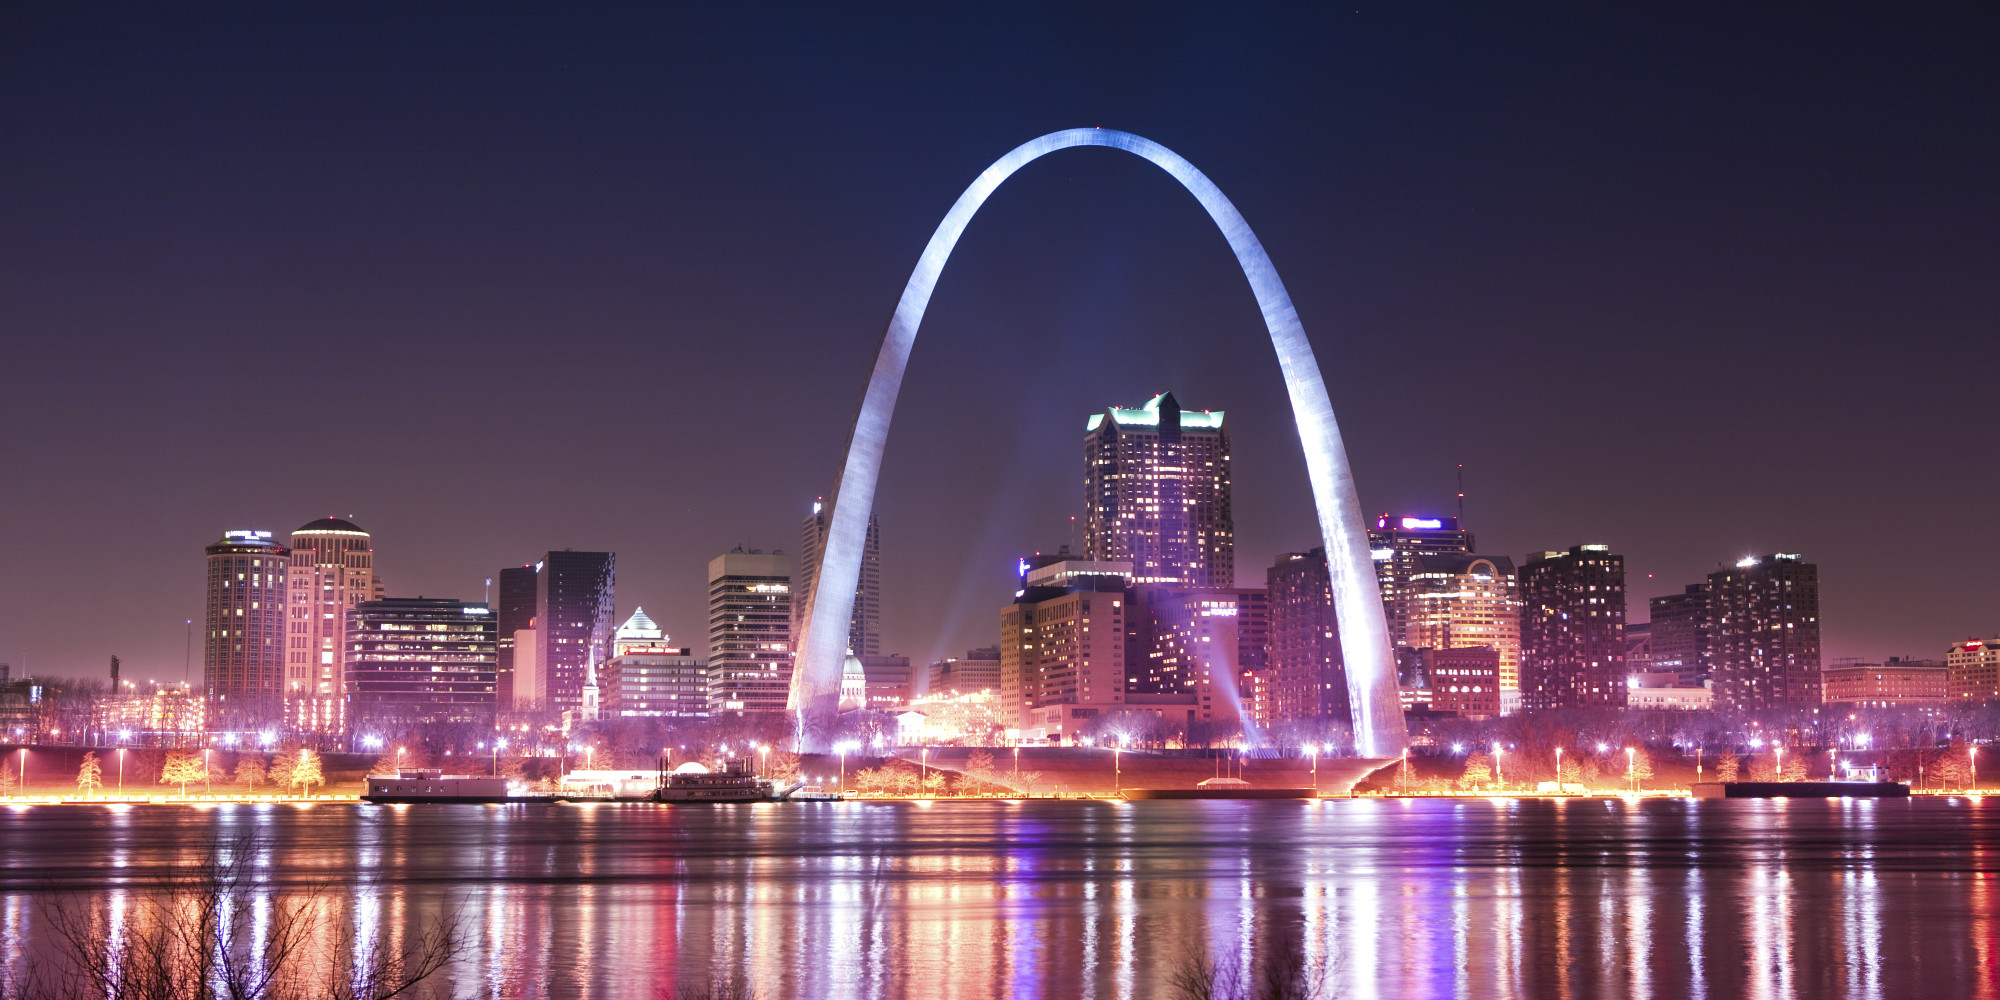 100 People Wrongfully Arrested In St. Louis Over Seven Years | HuffPost